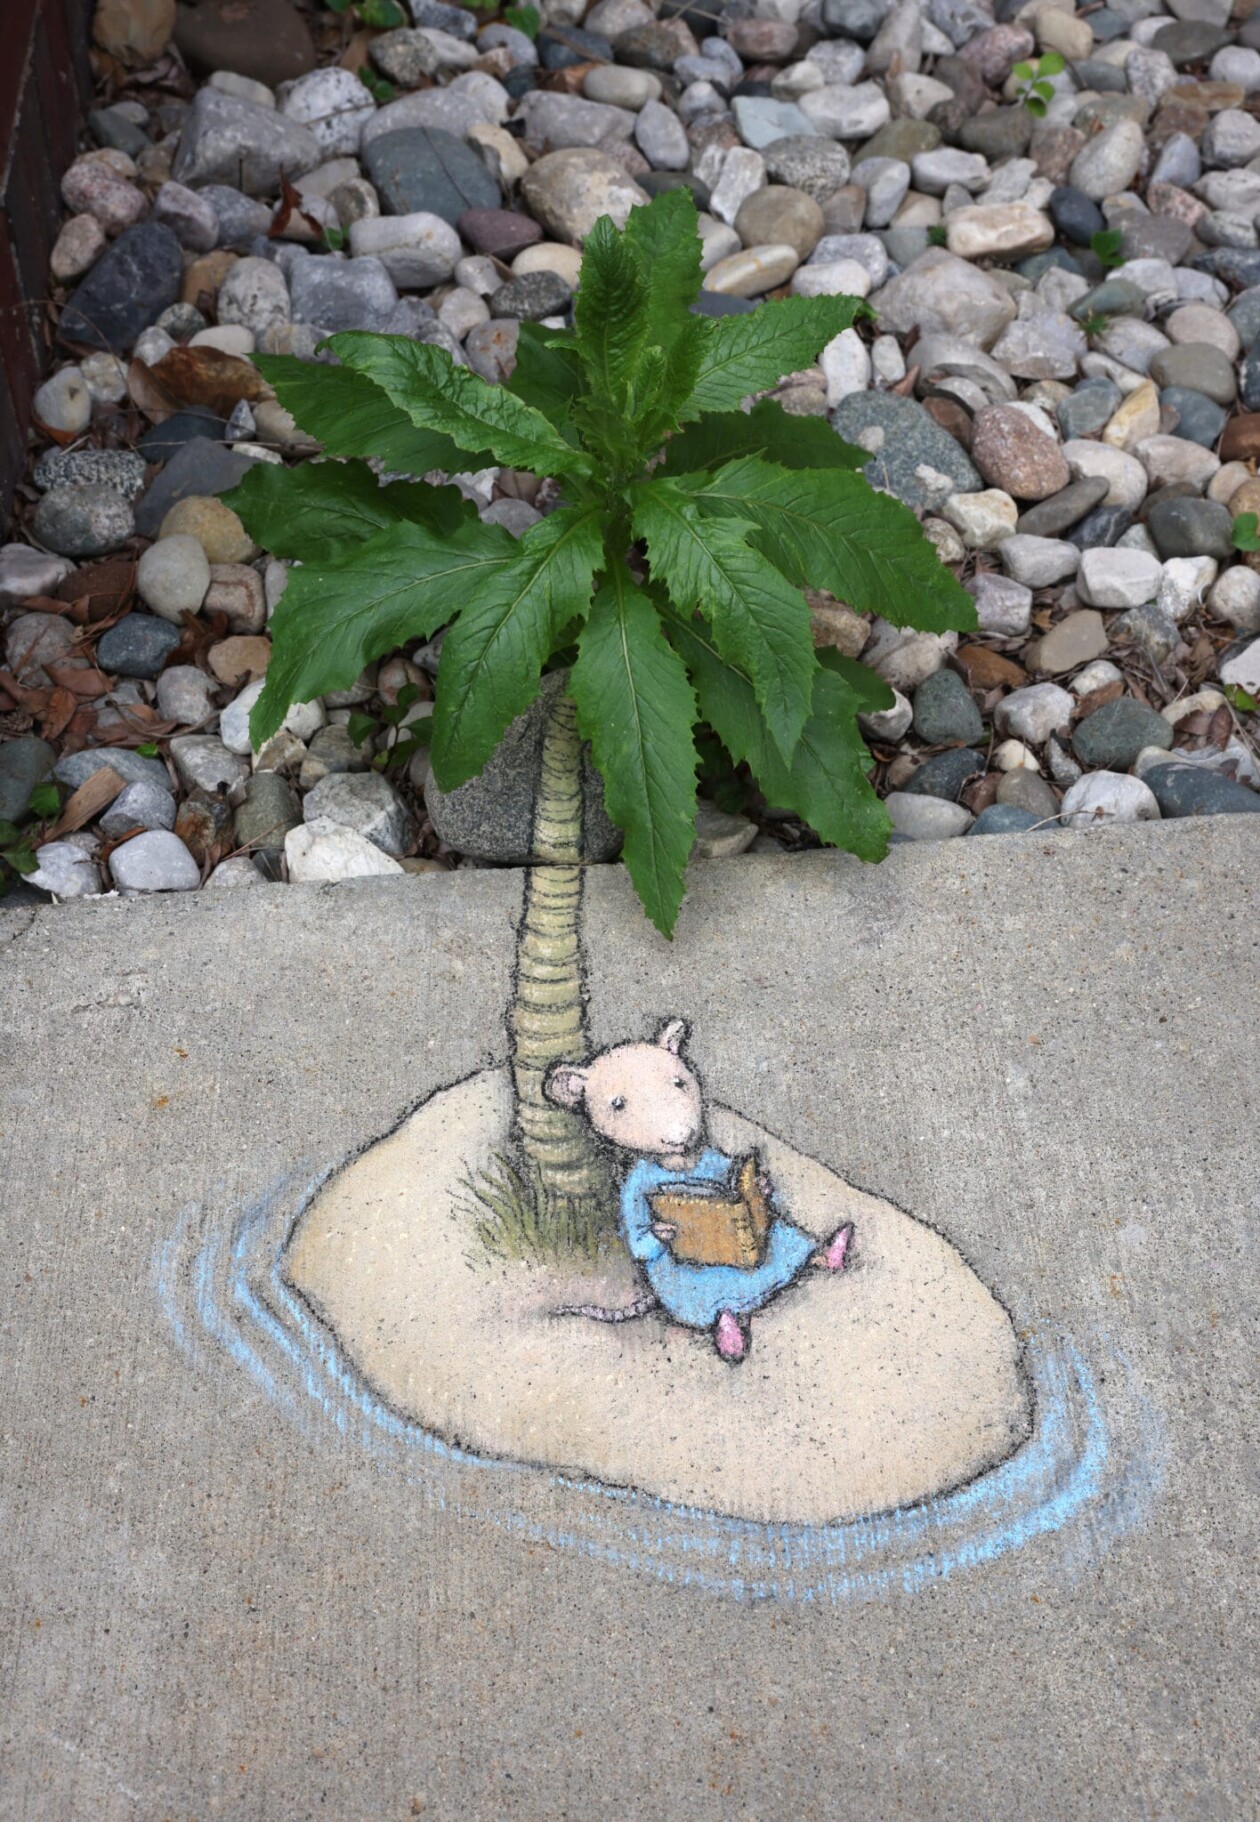 Playful Characters Drawn On Everyday Streets By David Zinn (8)